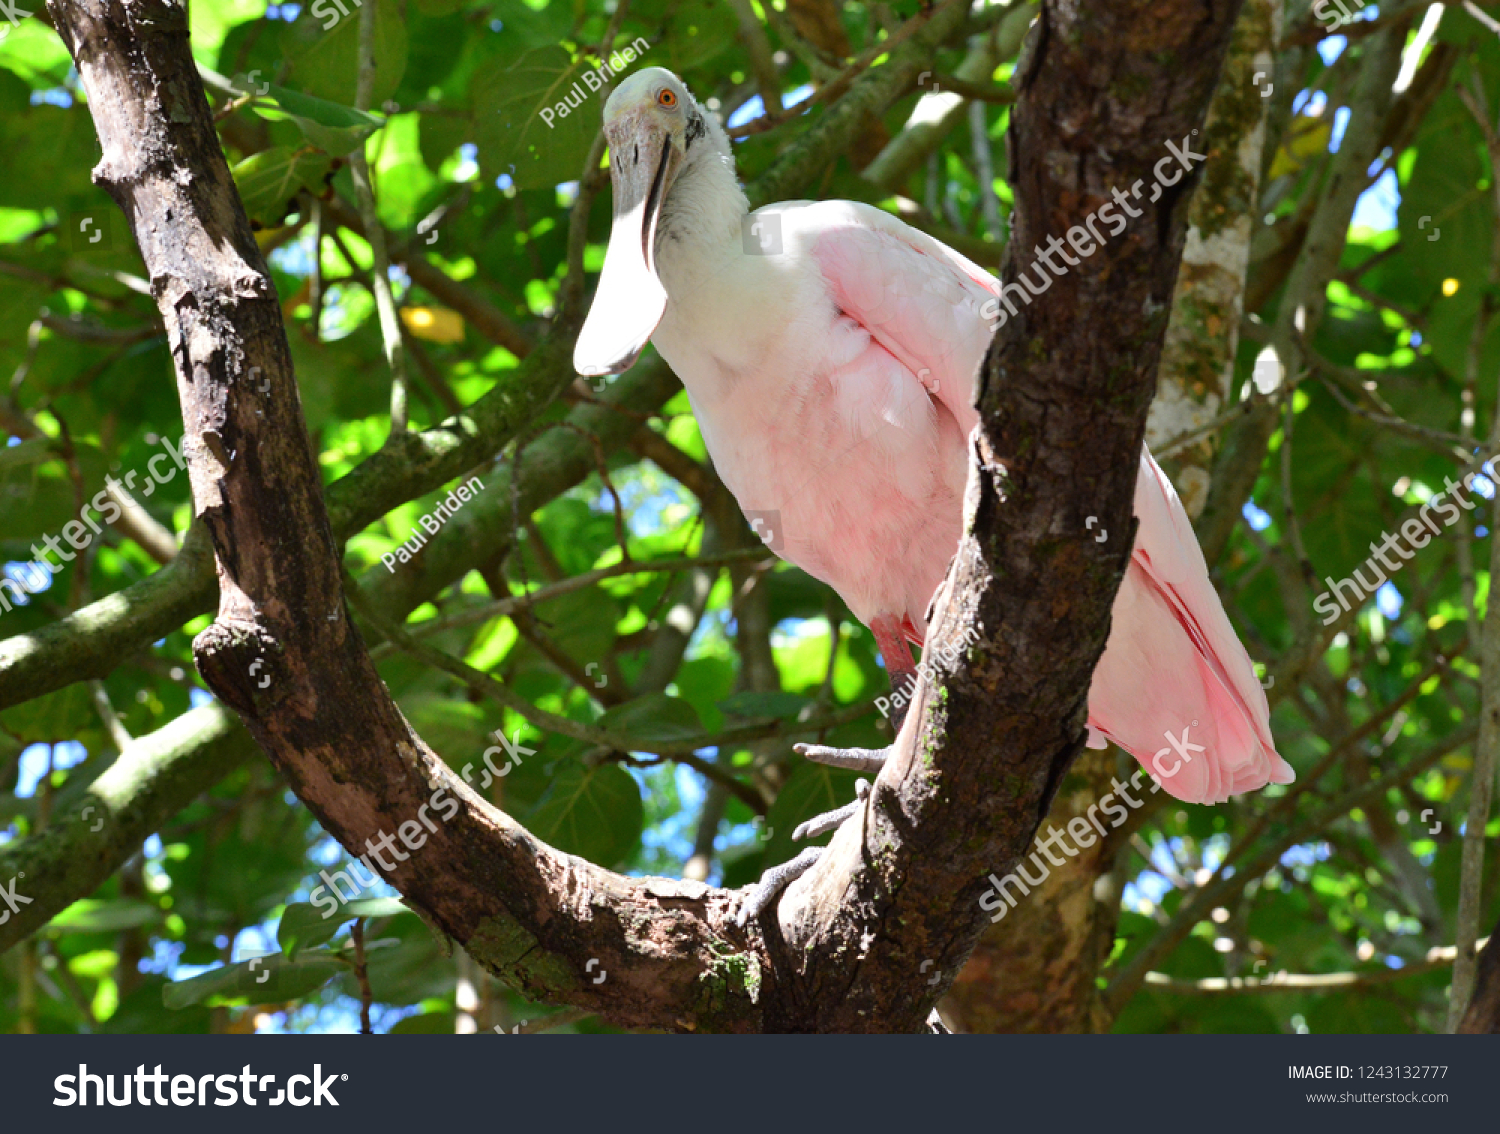 Roseate spoonbill ,a gregarious wading bird of the ibis and spoonbill family. #1243132777